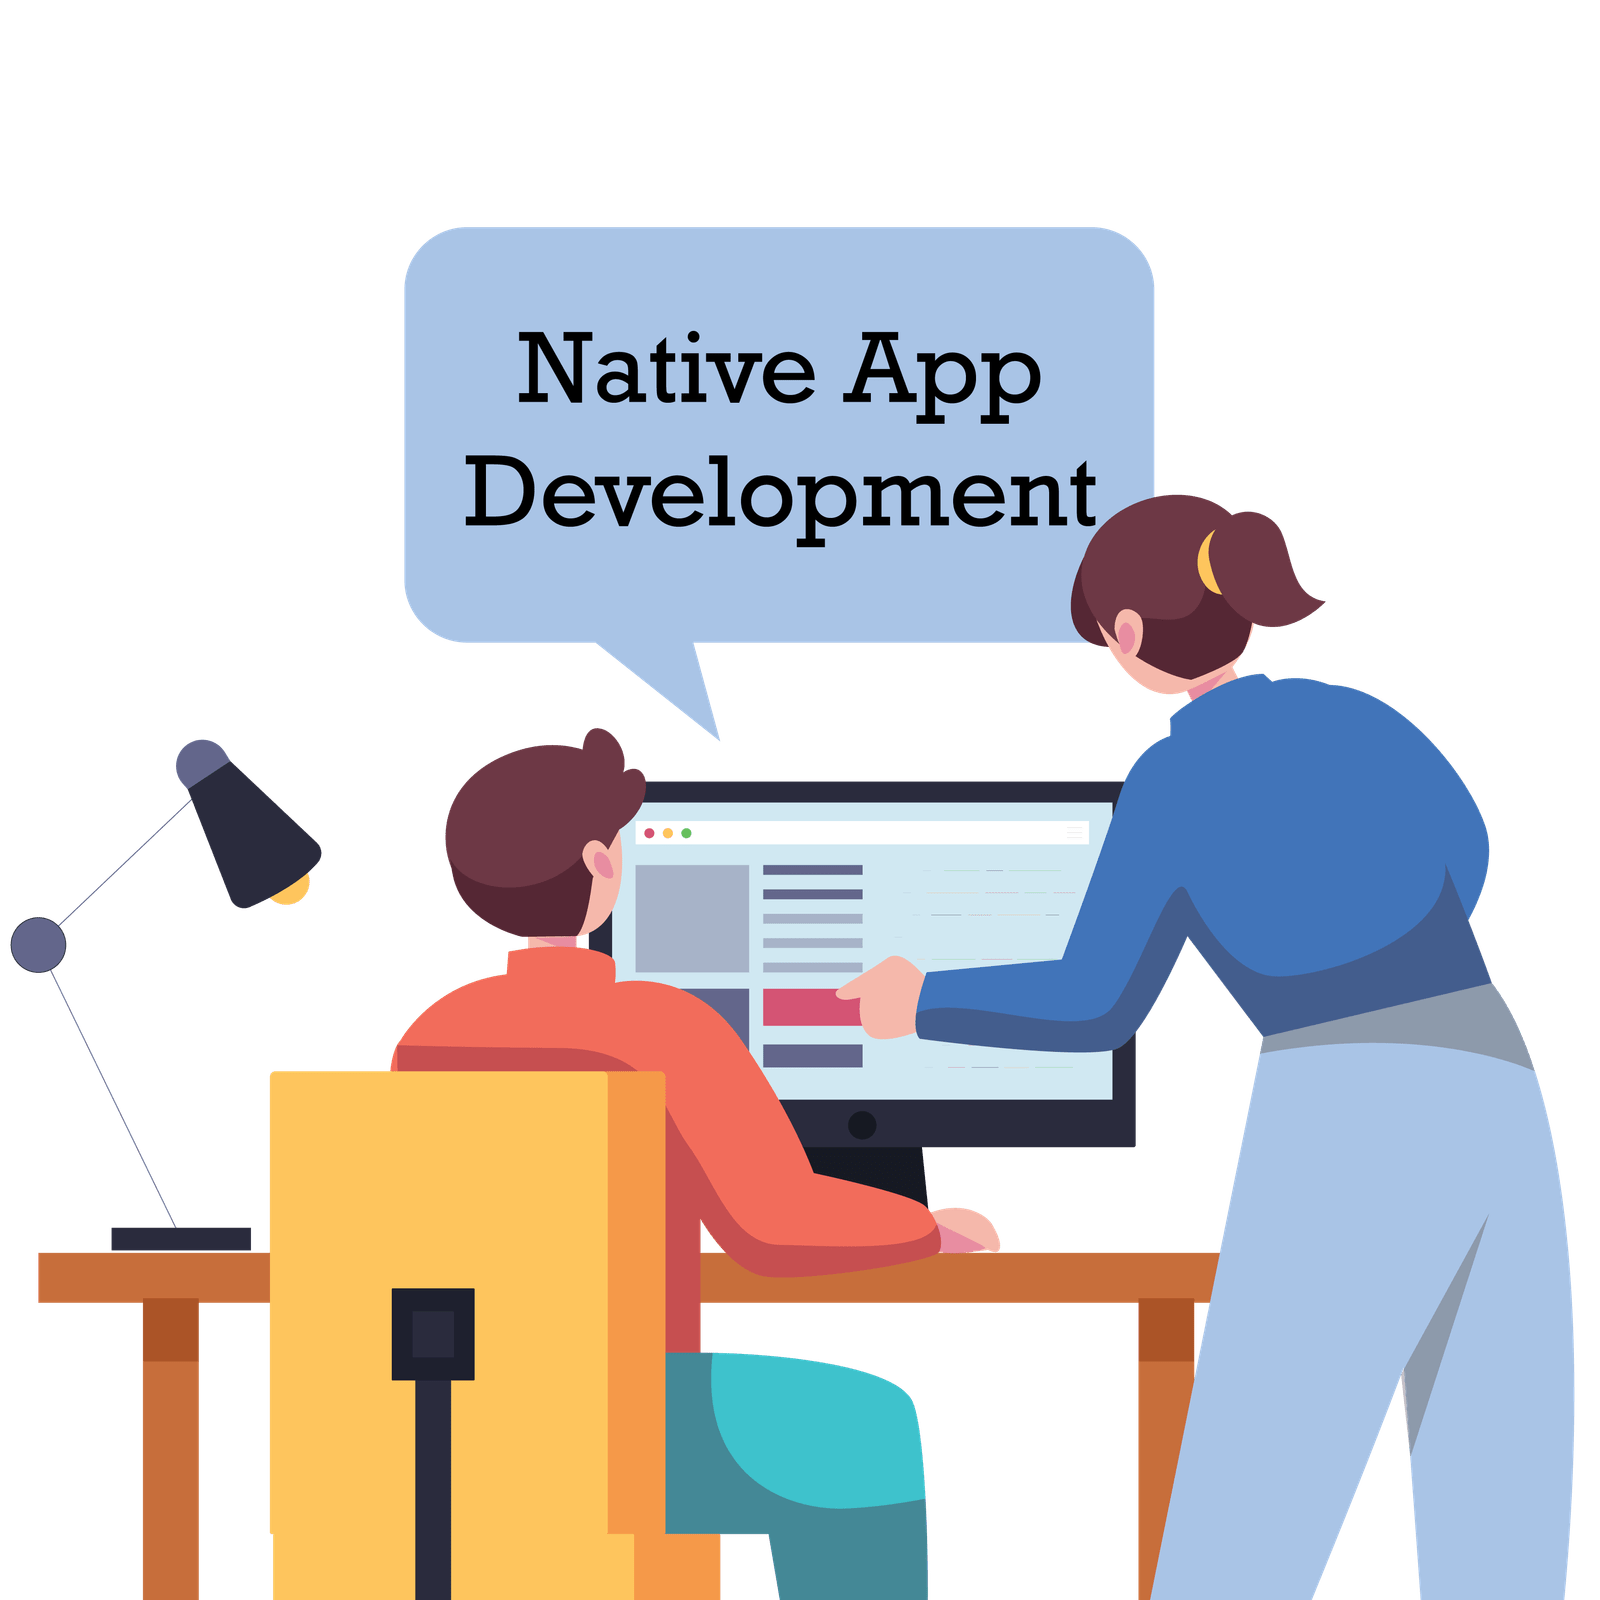 Share Your Ideas With Our Native App Experts